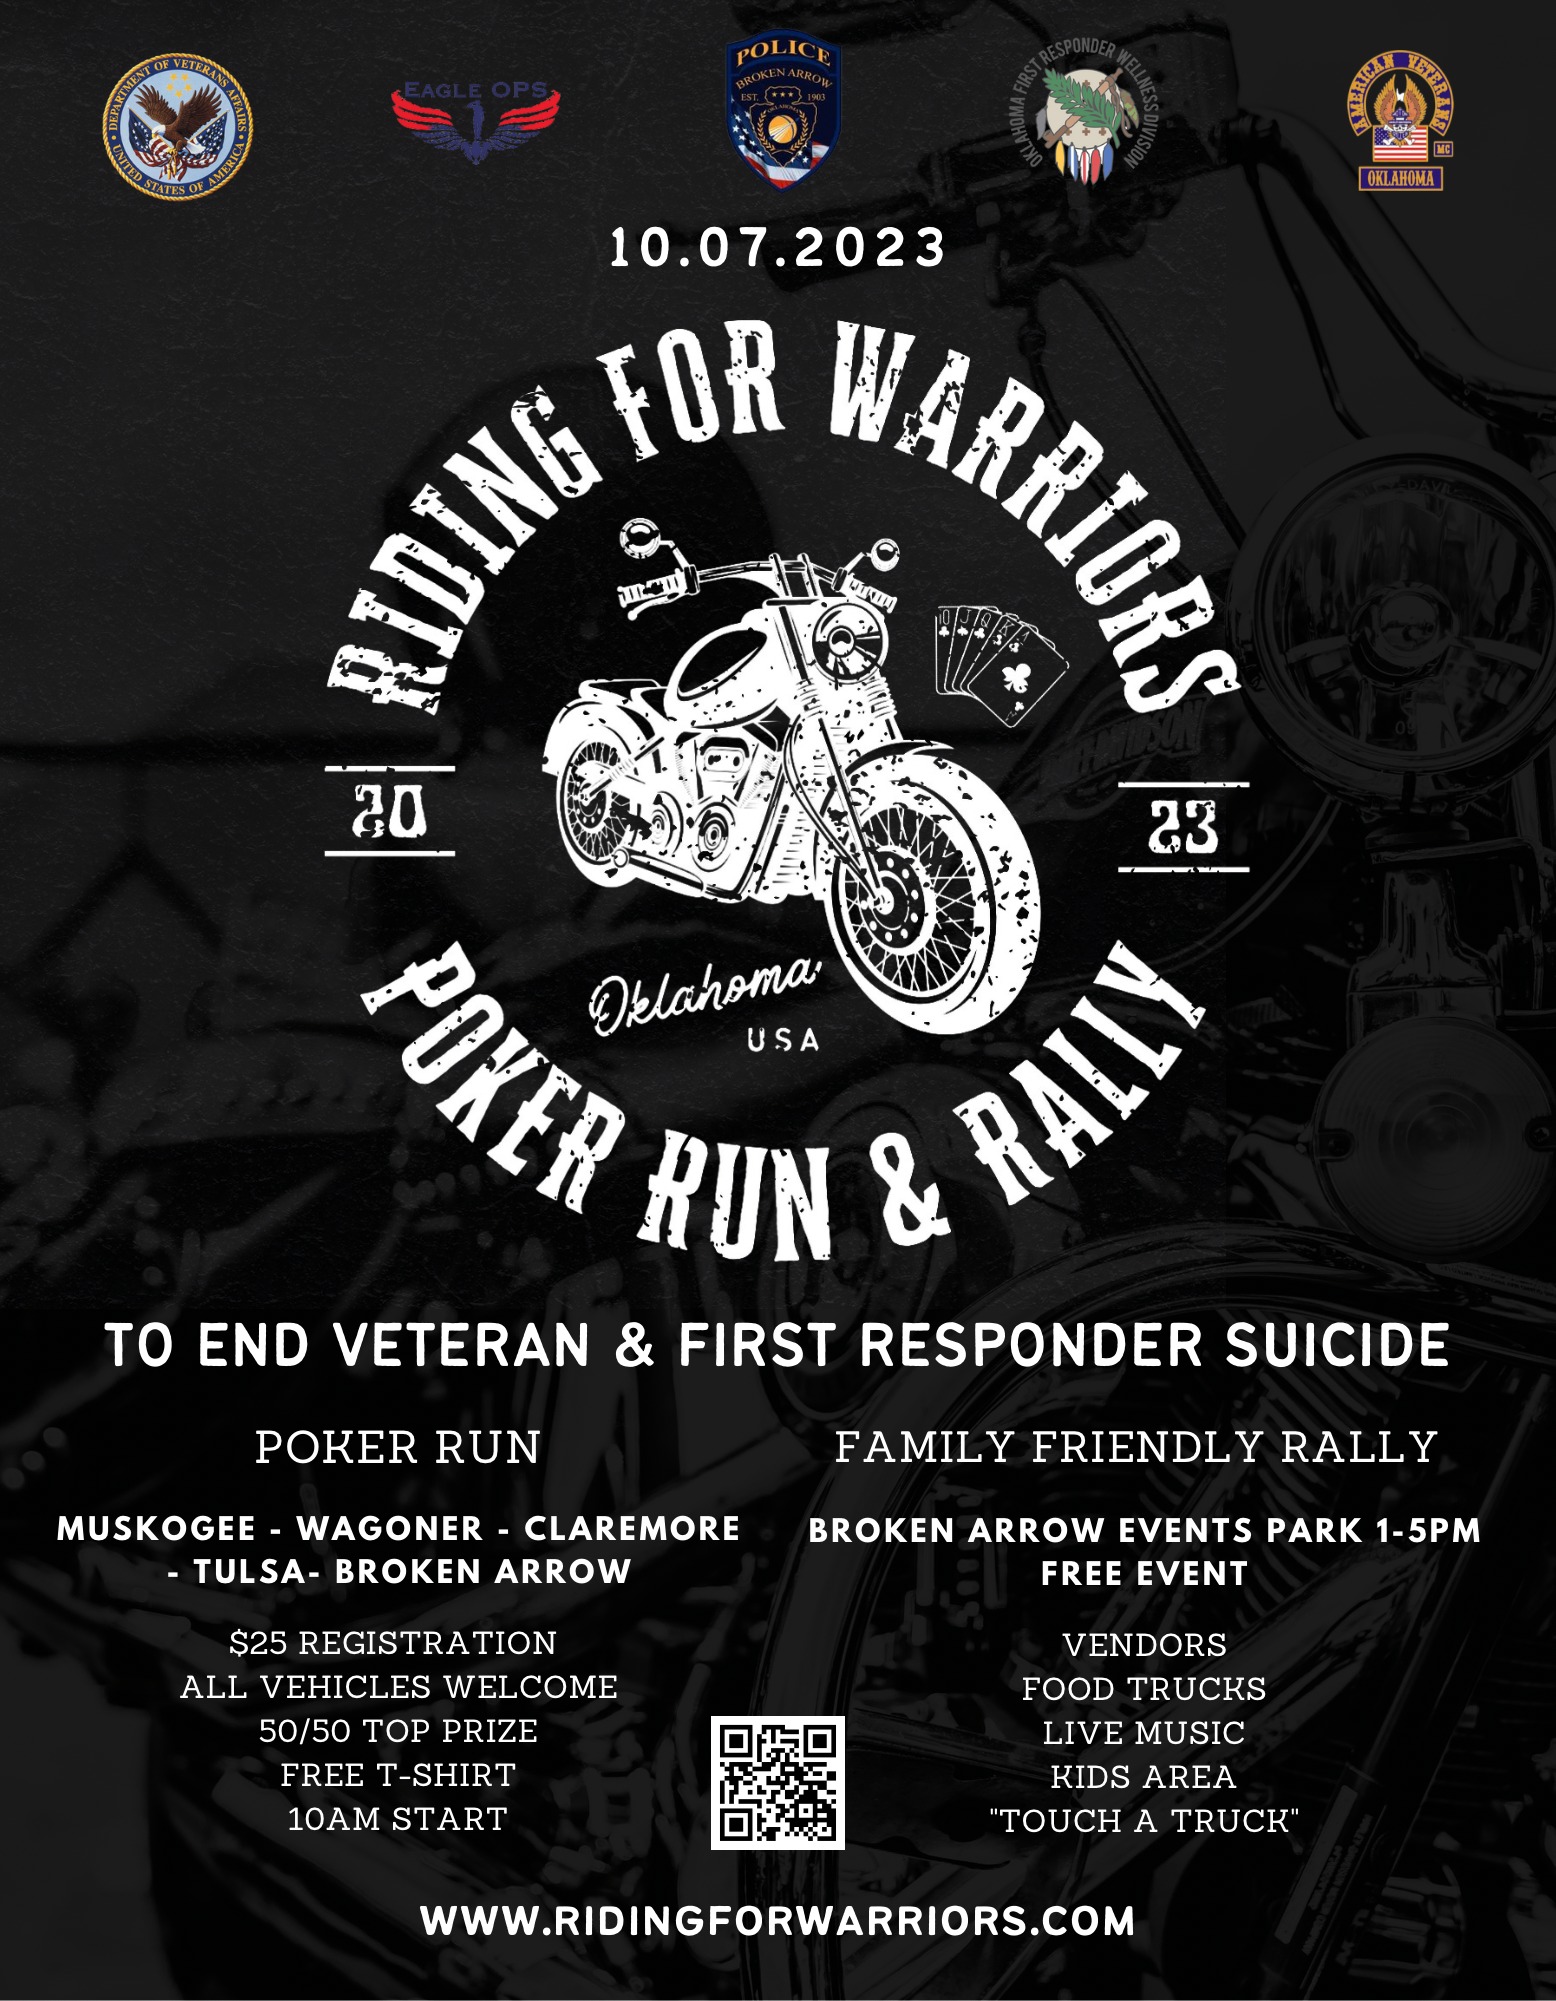 Riding for Warriors Oct 7 2023